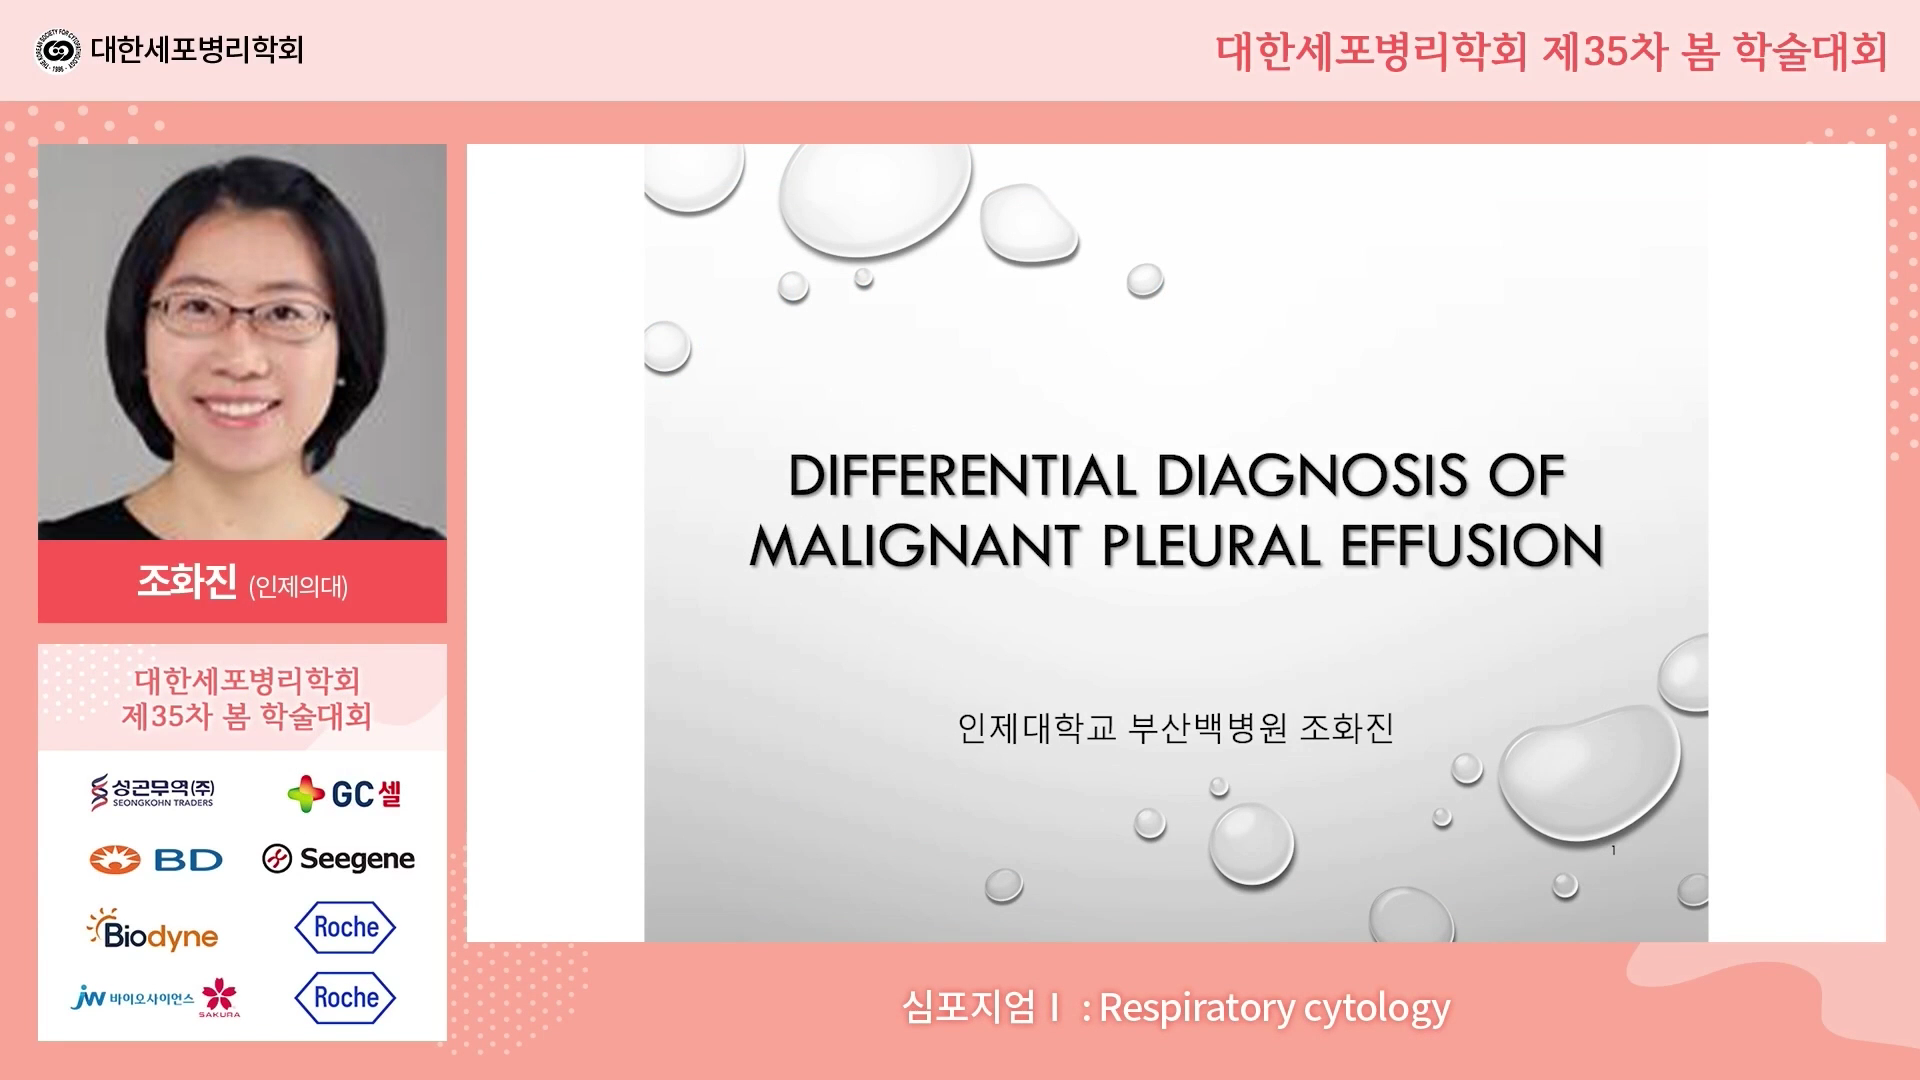 Differential diagnosis of malignant pleural effusion